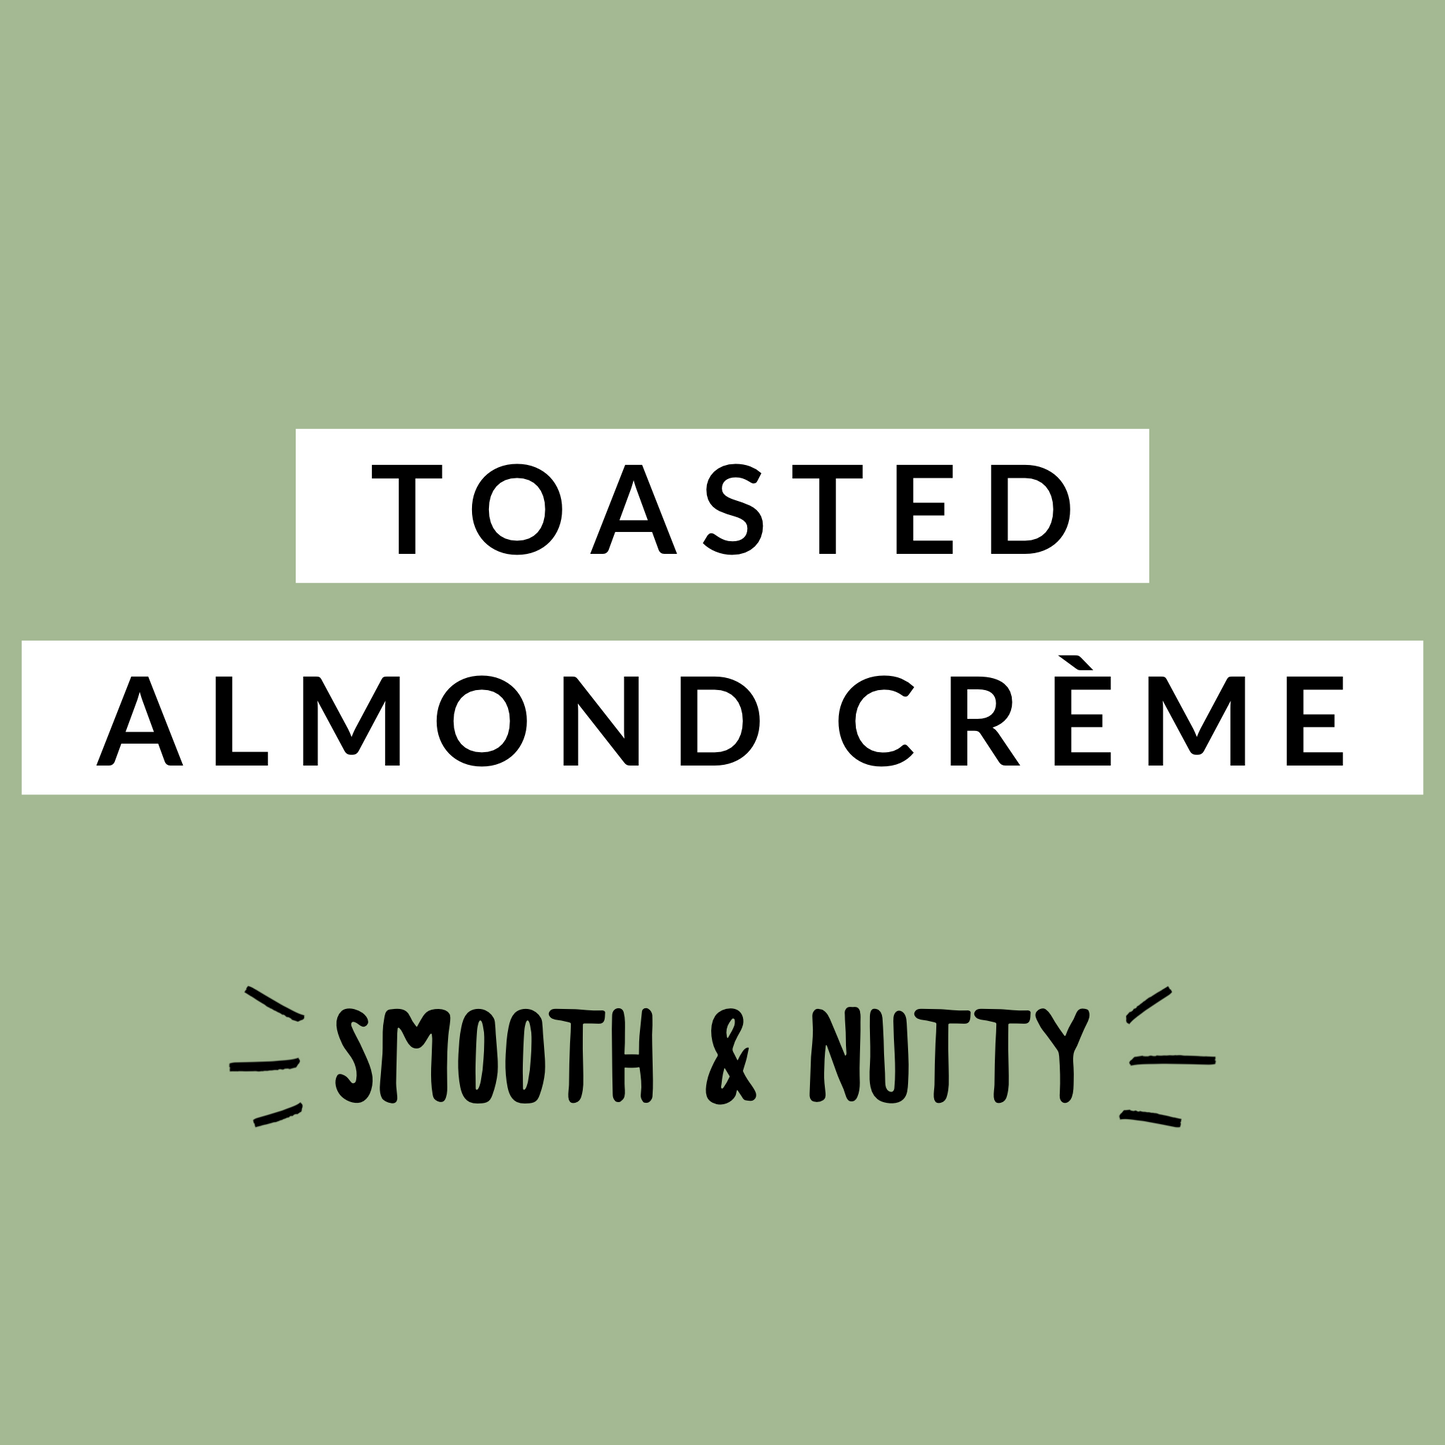 Toasted Almond Crème